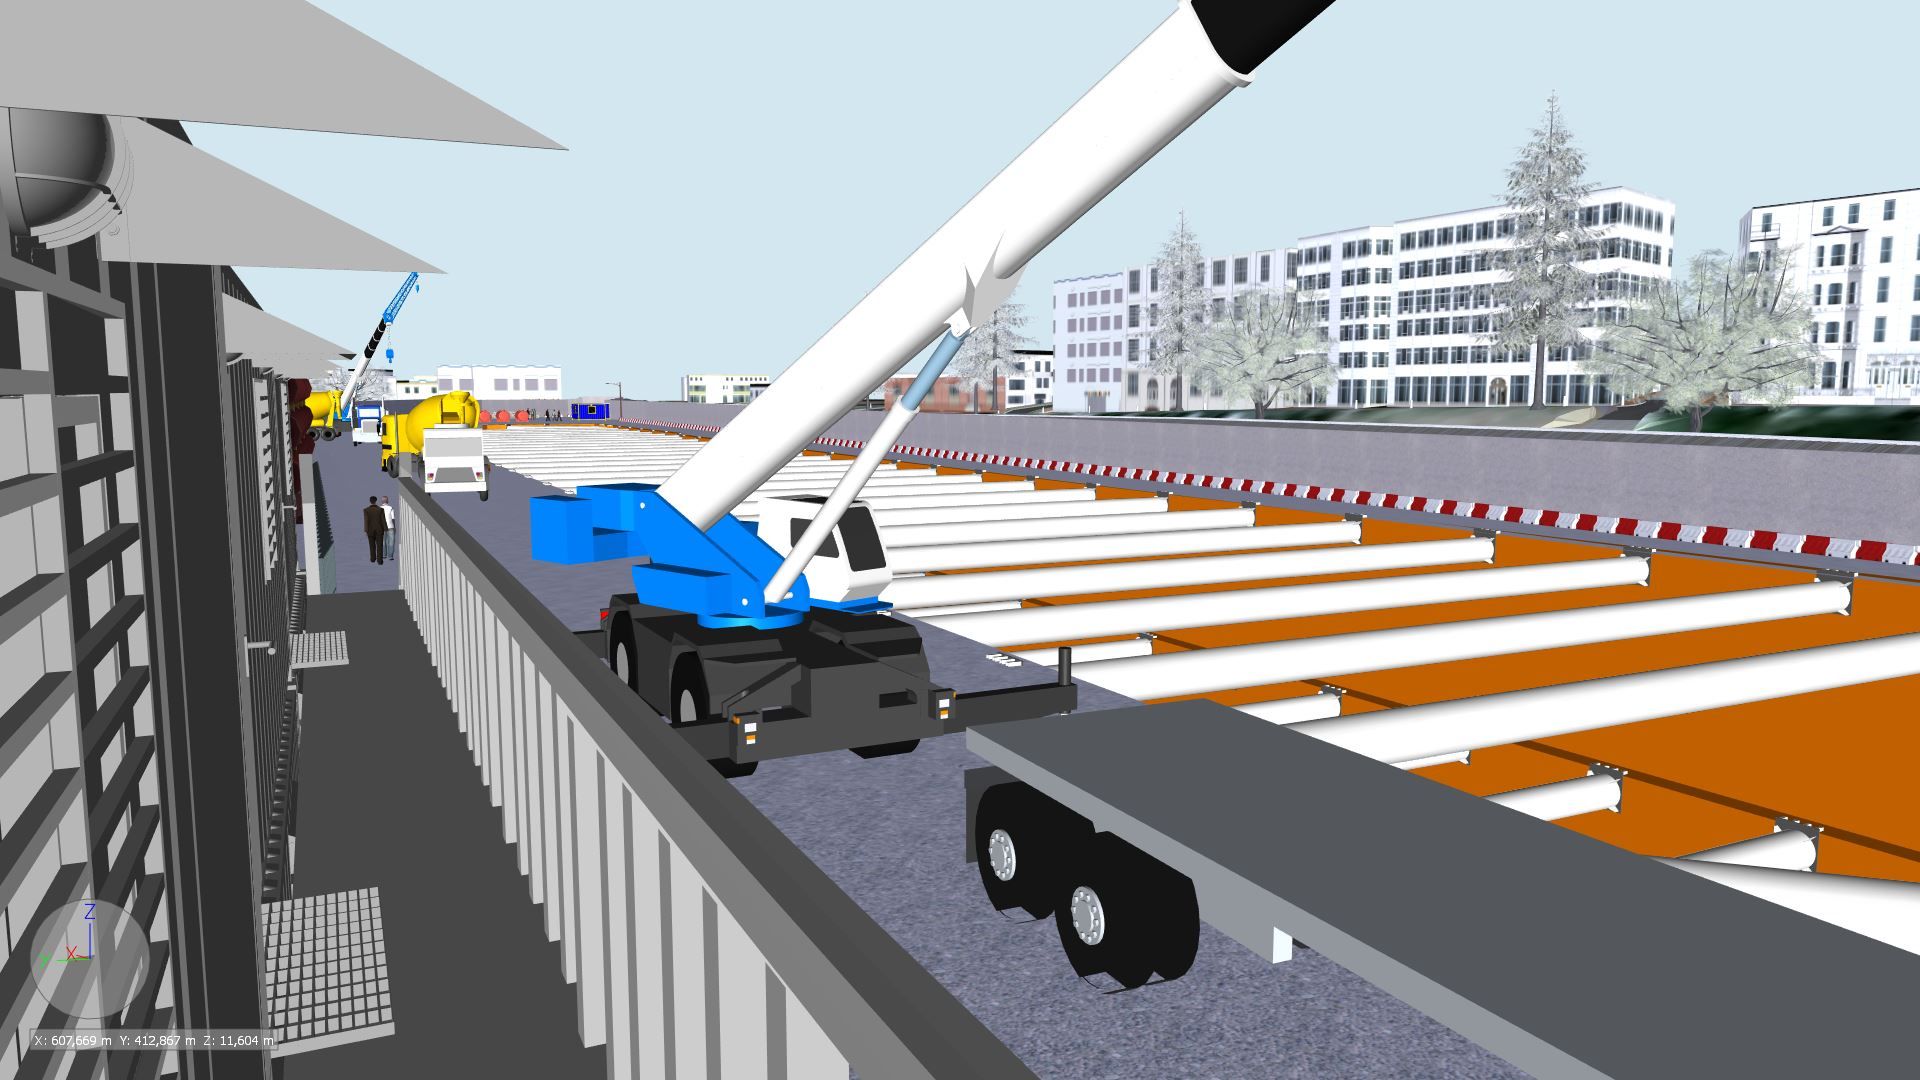 part of a 3D model for the construction site with heavy machinery and vehicles